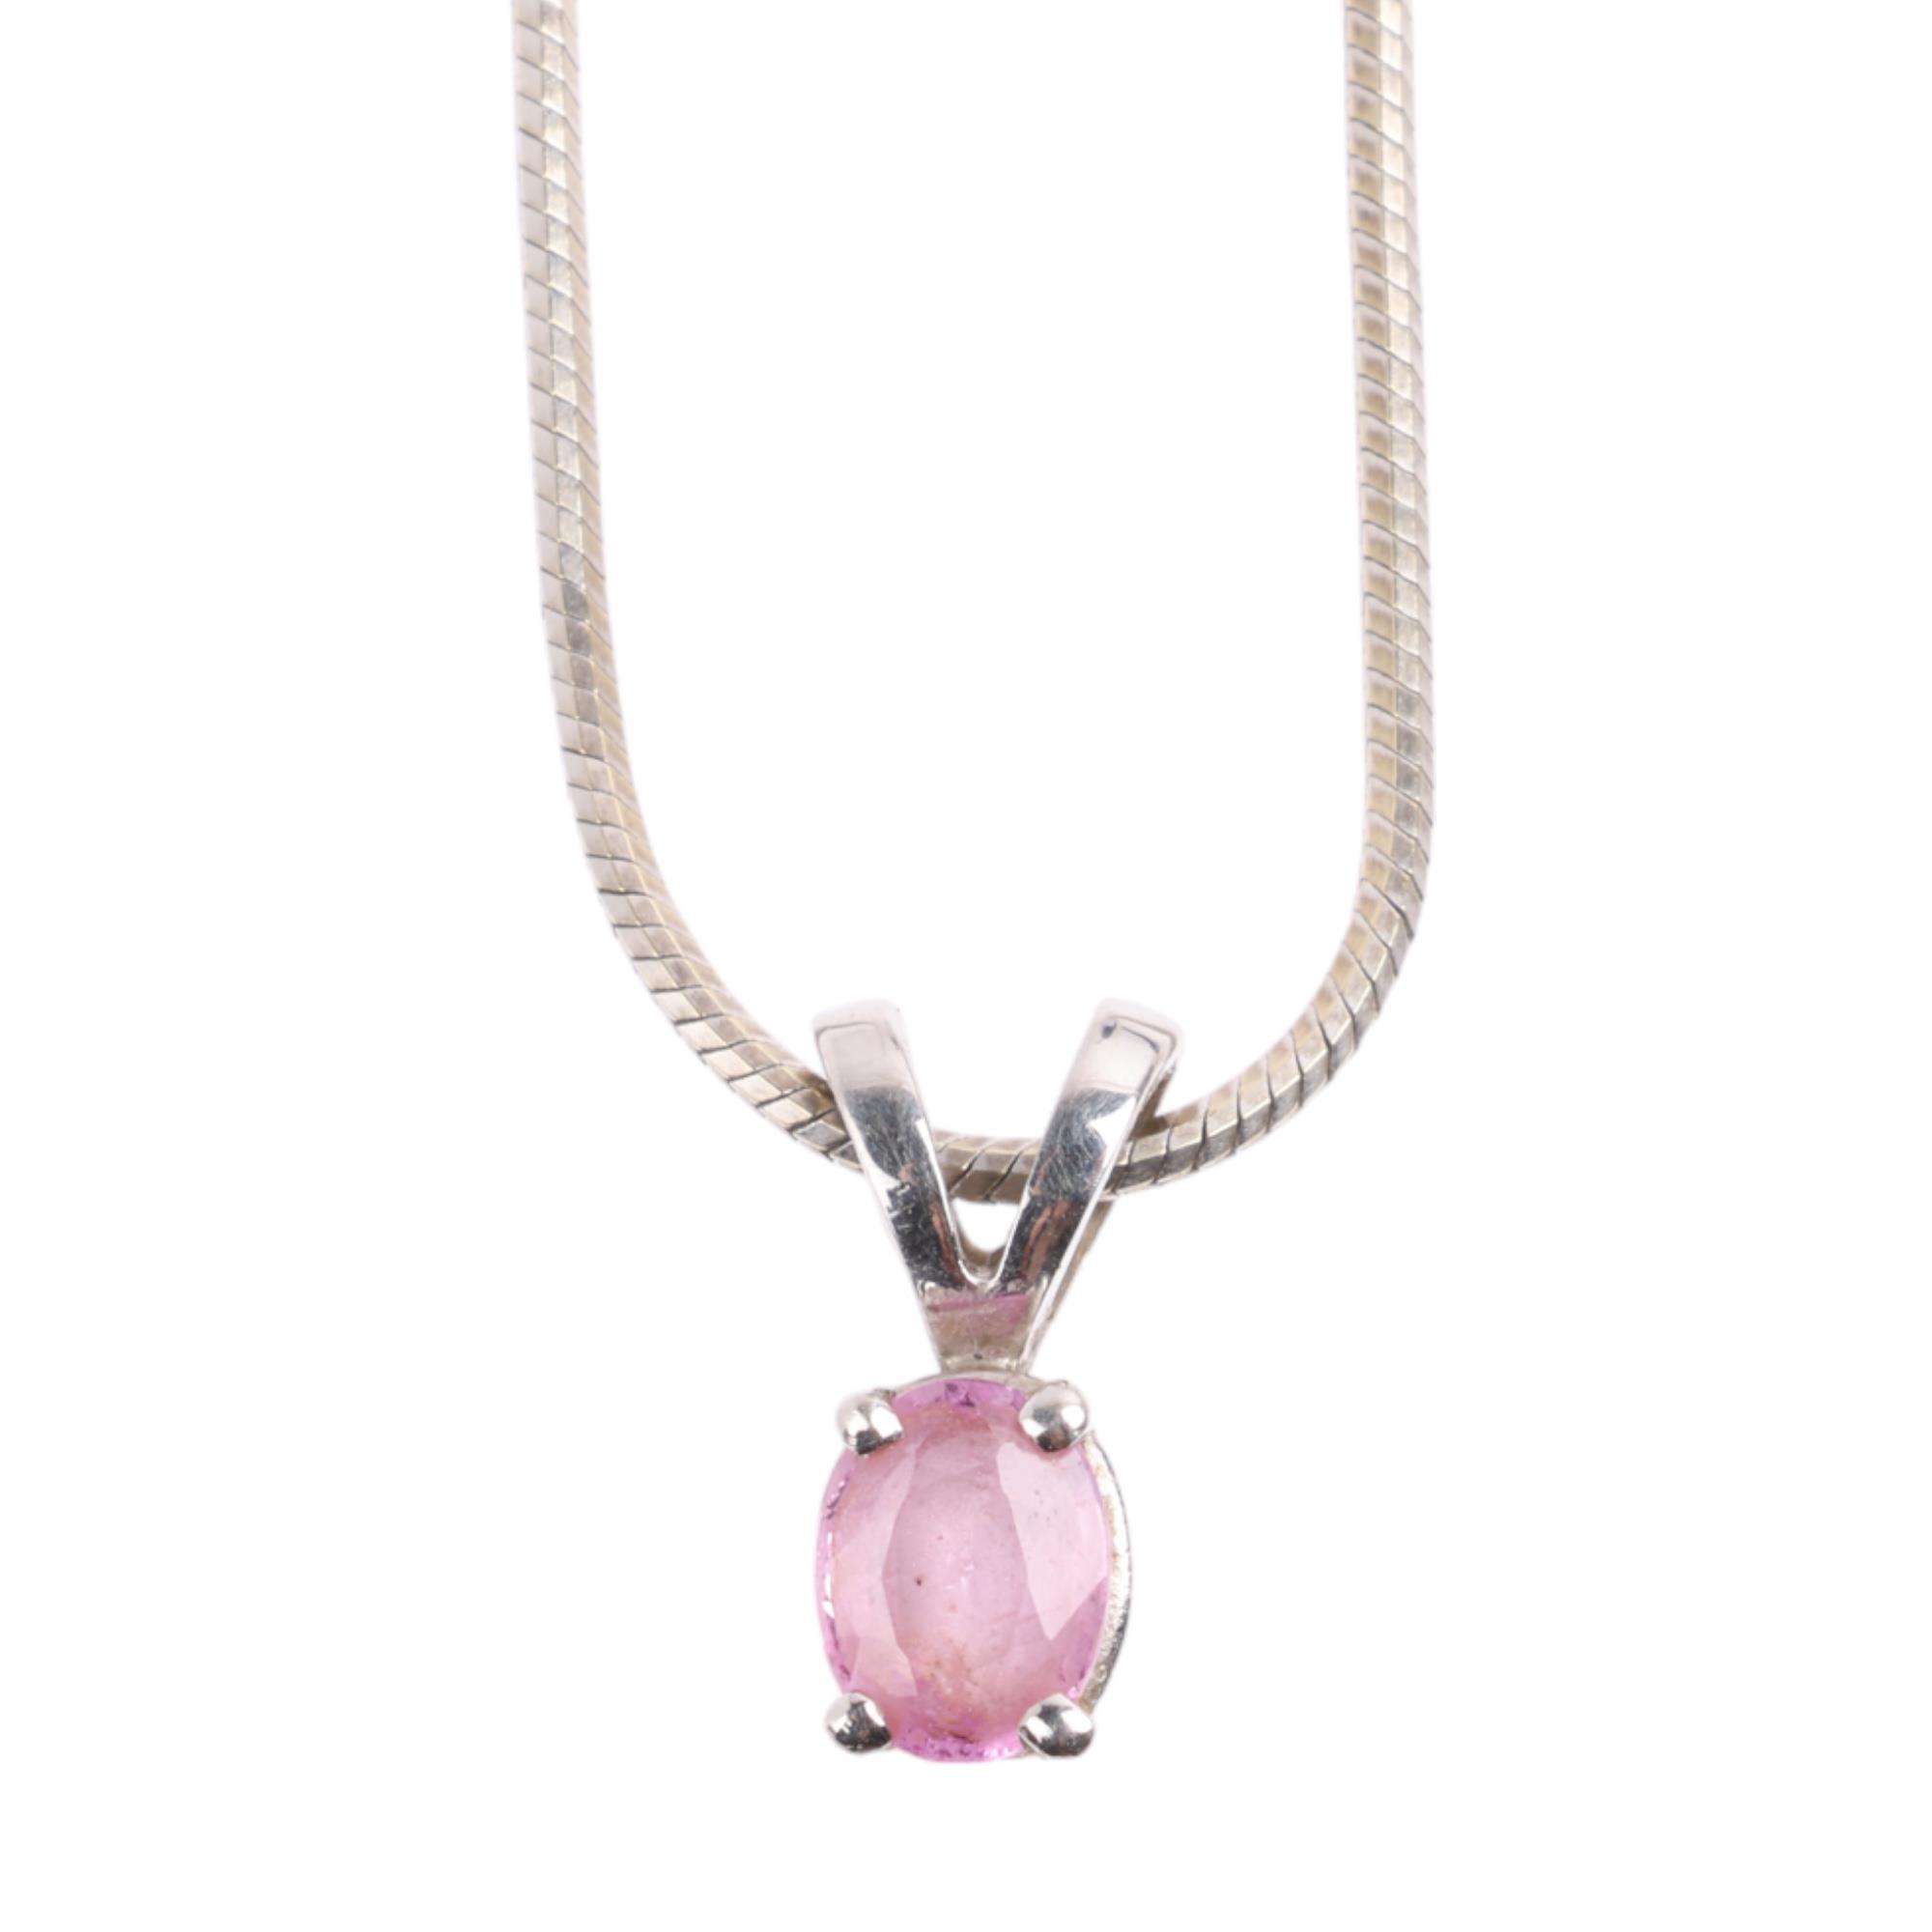 A 9ct white gold pink sapphire pendant necklace, on 9ct herringbone link chain, pendant 10.9mm,